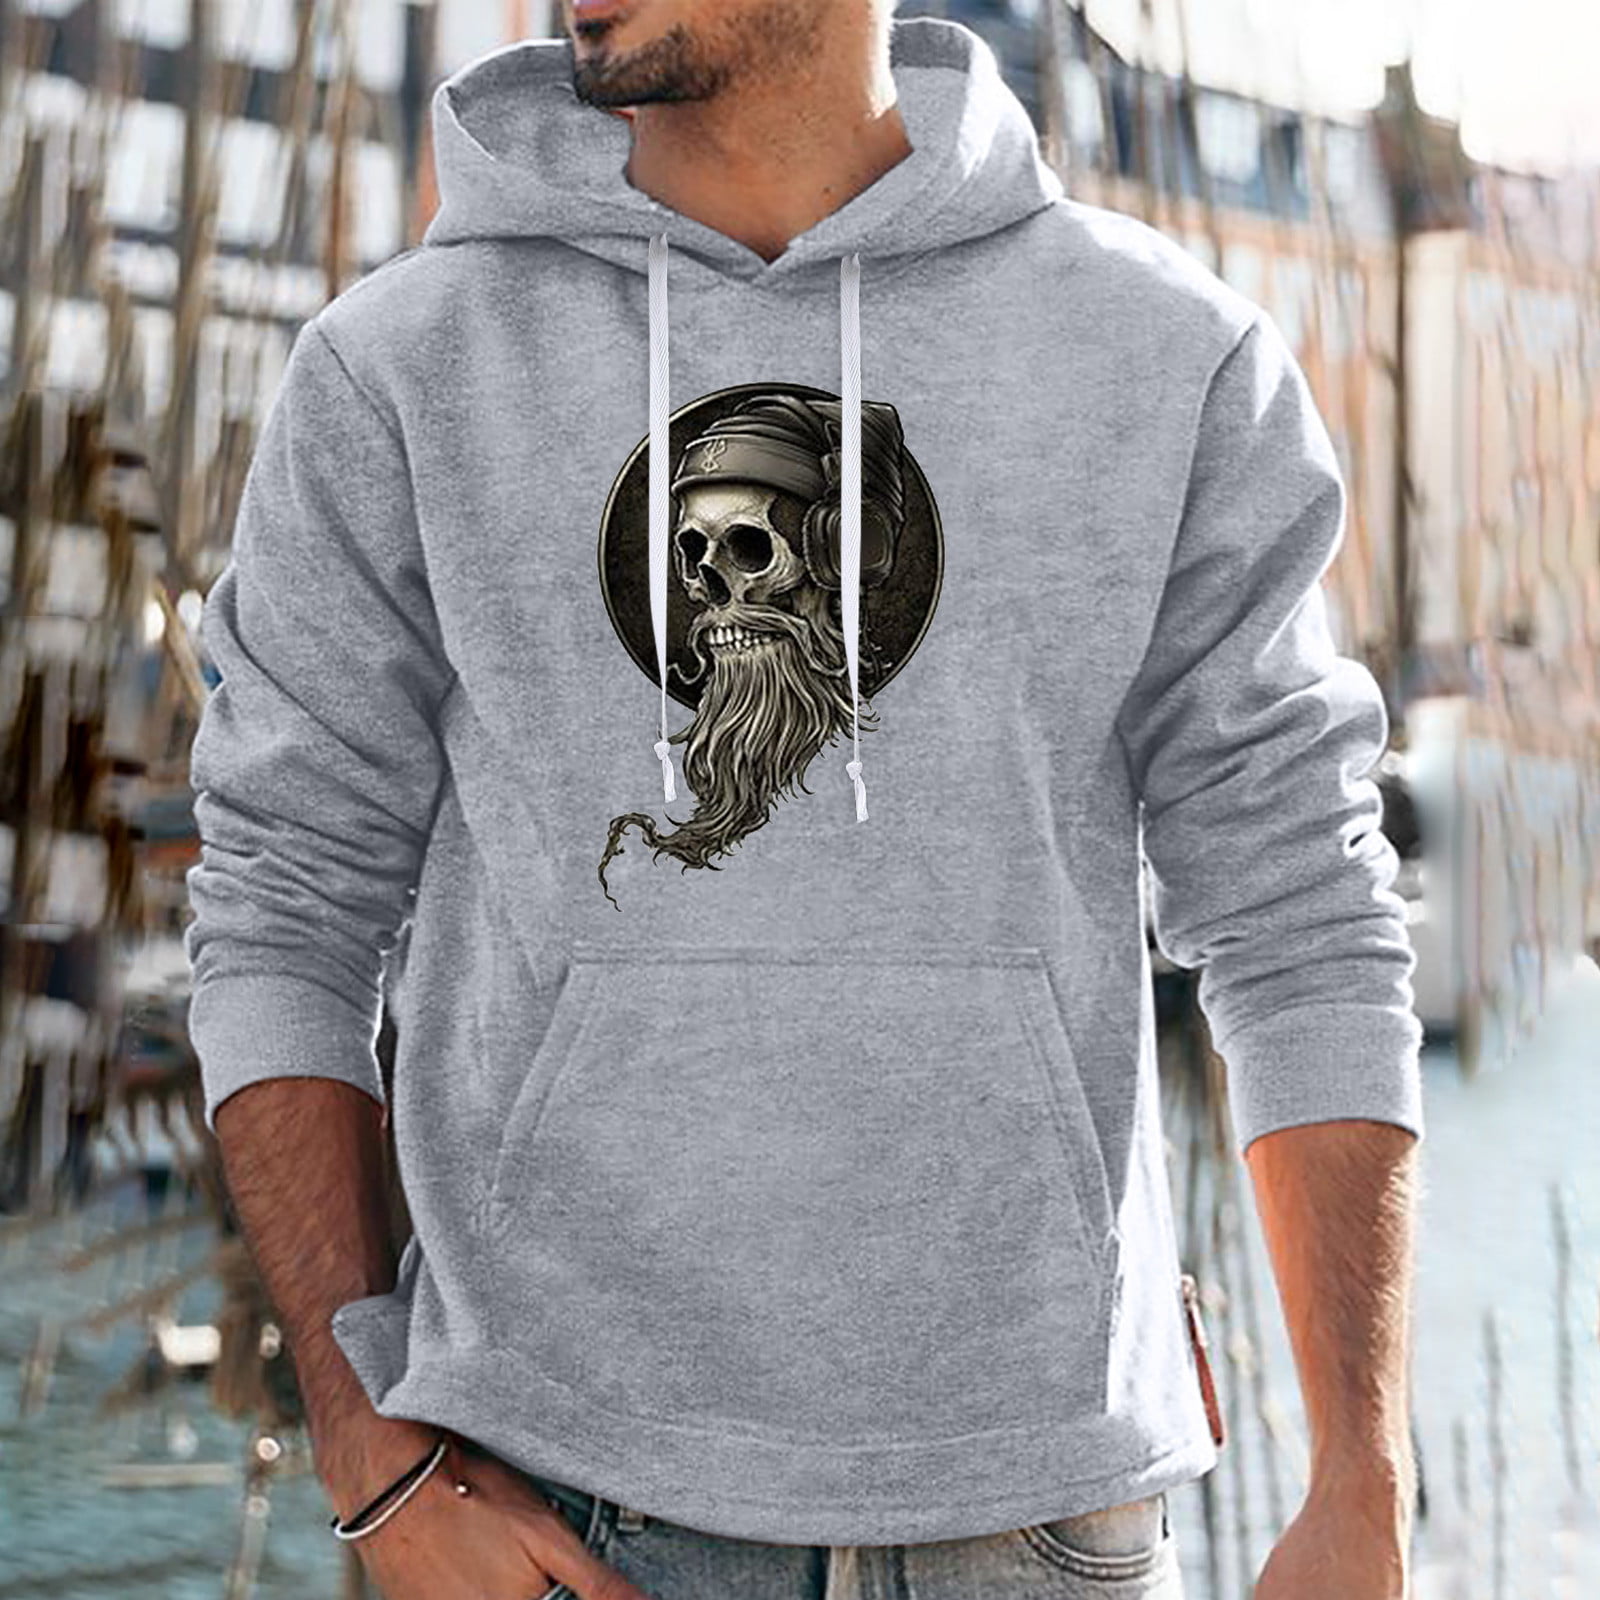 Active Performance Hoodie Pullover Sweatshirt with Graphic 